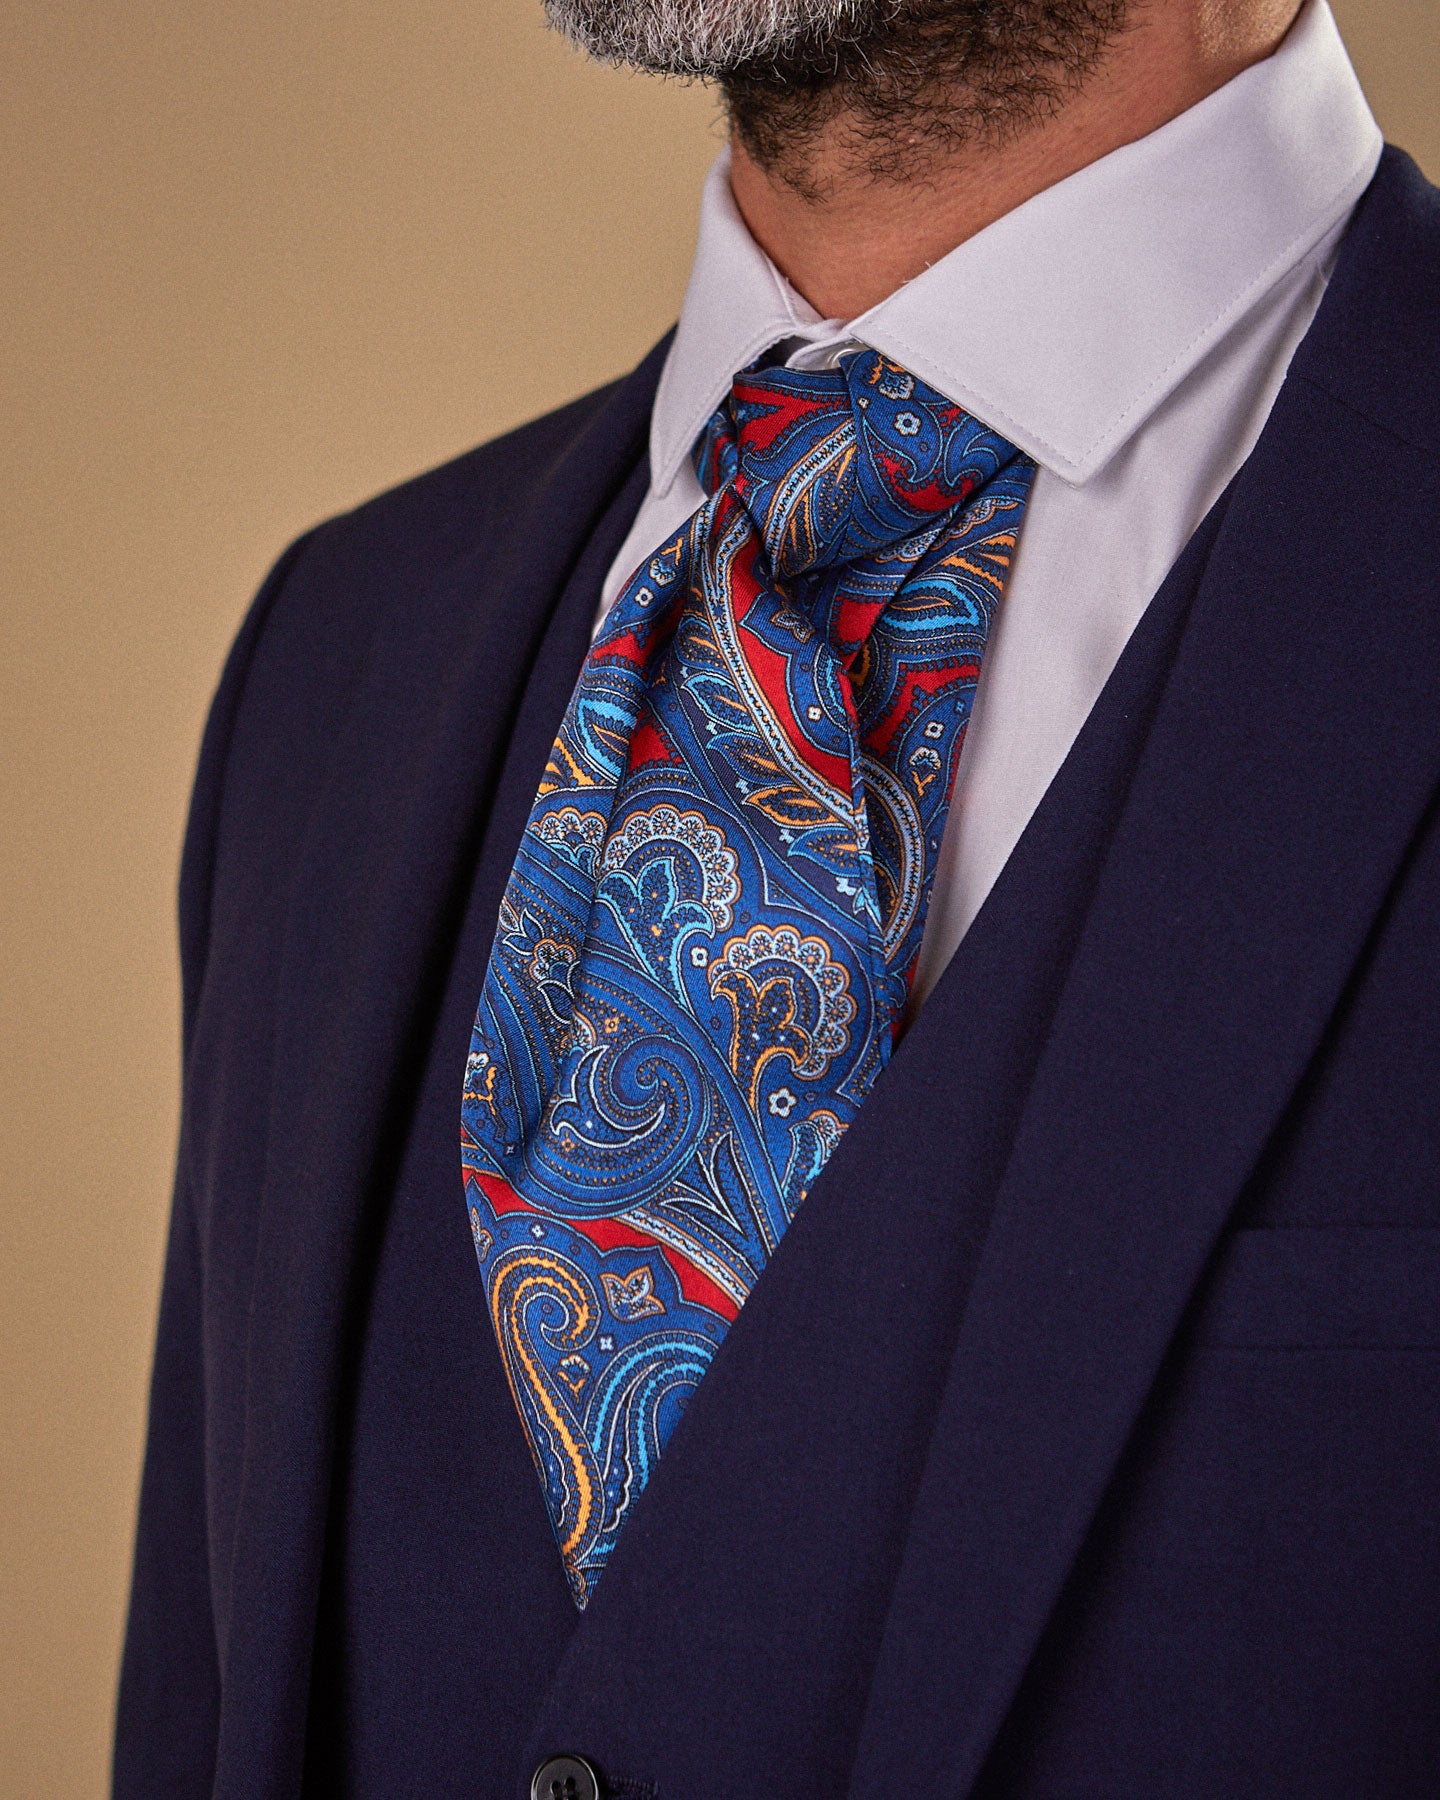 Close up side view wearing an Oxford silk Double Ascot tie from SOHO Scarves, clearly showing the swirls of paisley on a vermillion ground.